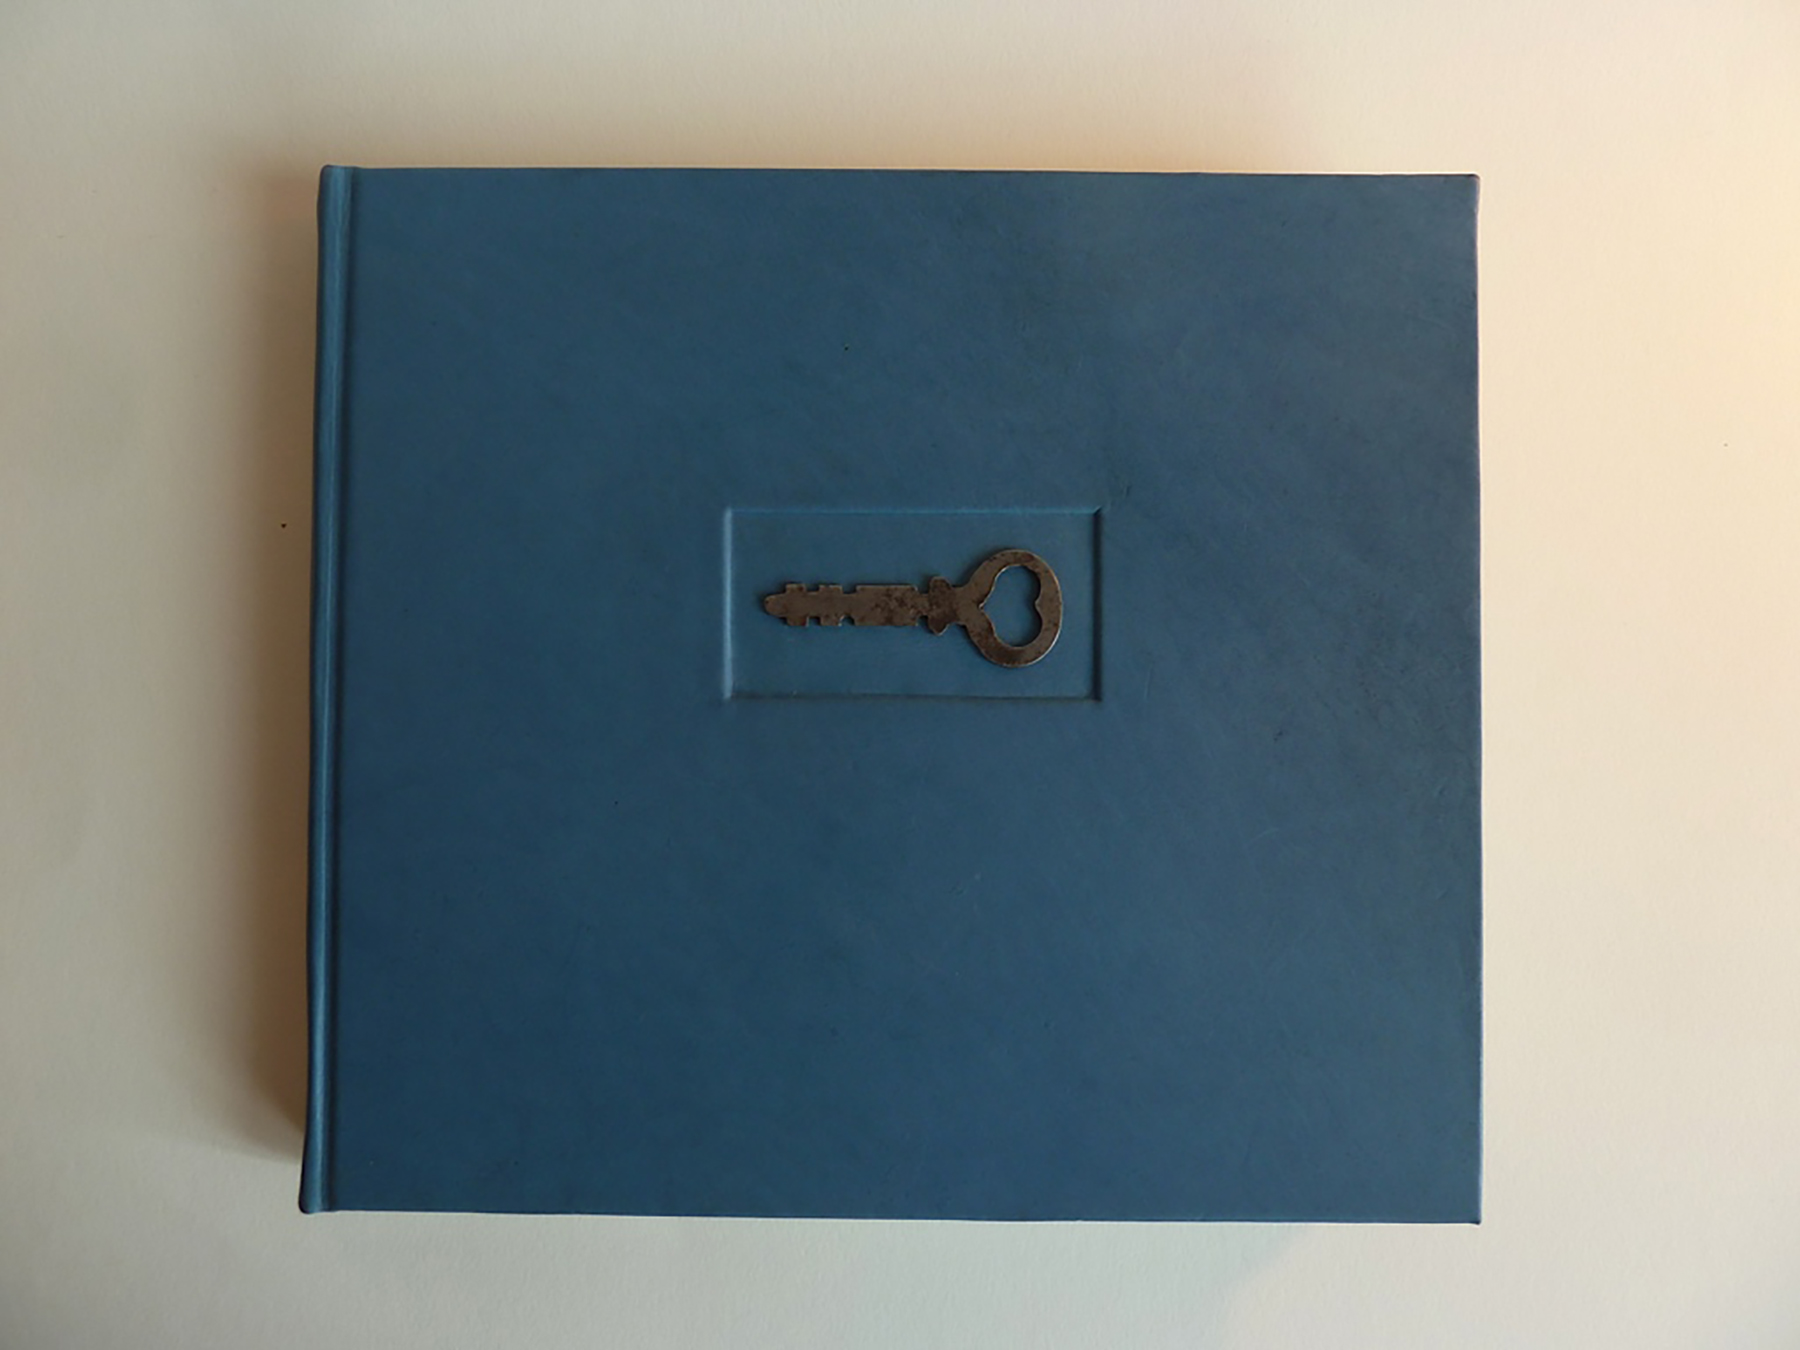 Full leather Guest Book with antique key